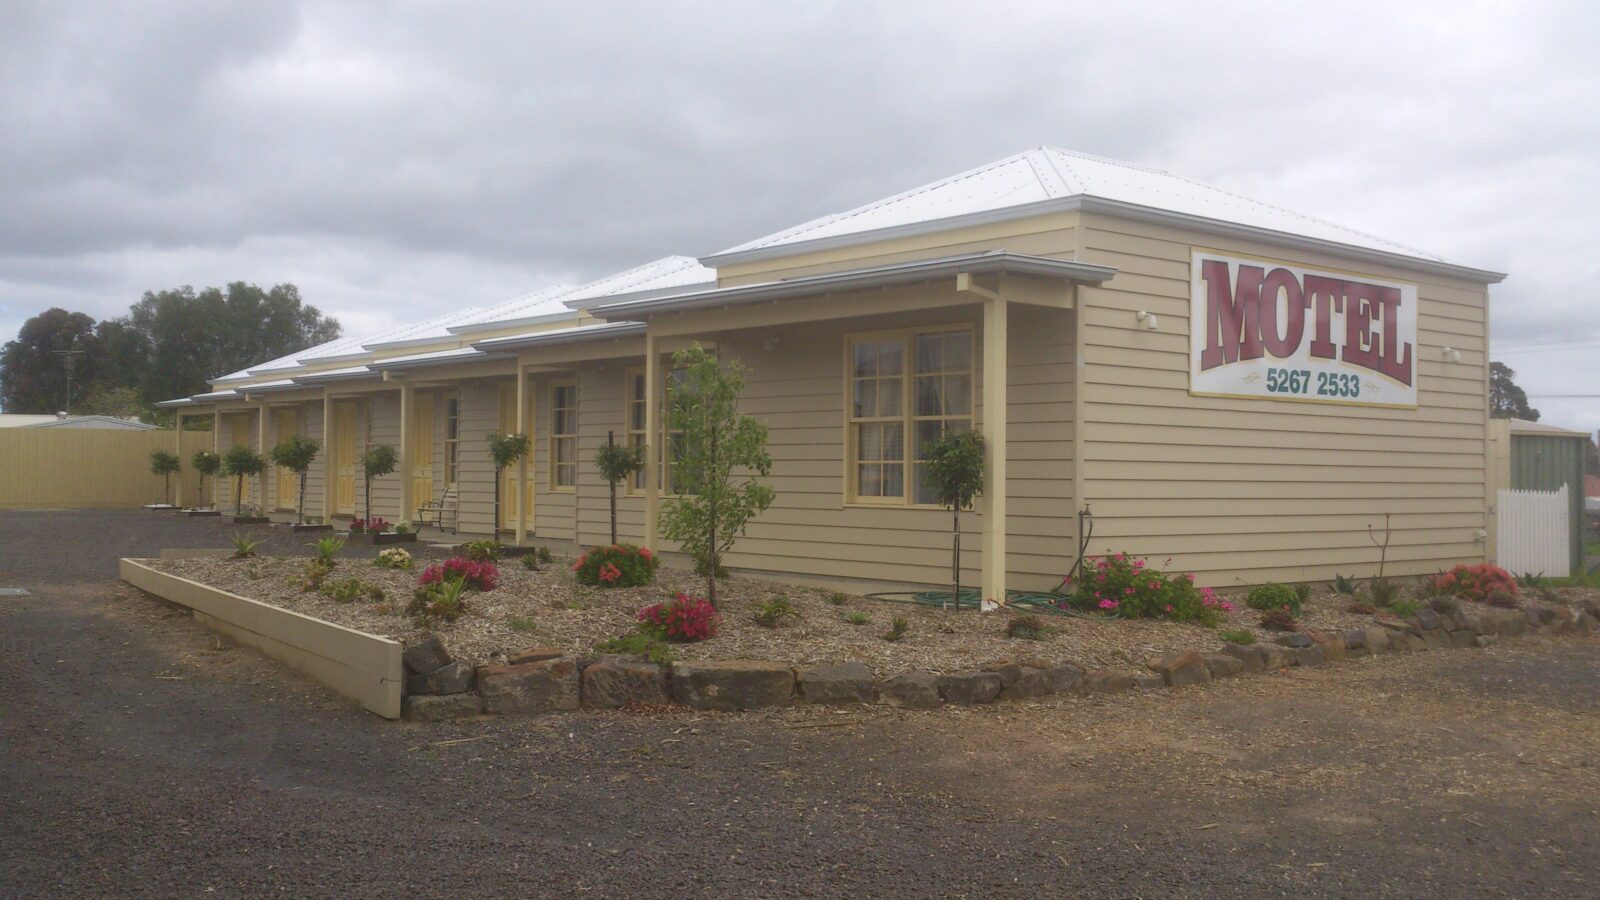 The Entrance to the Motel